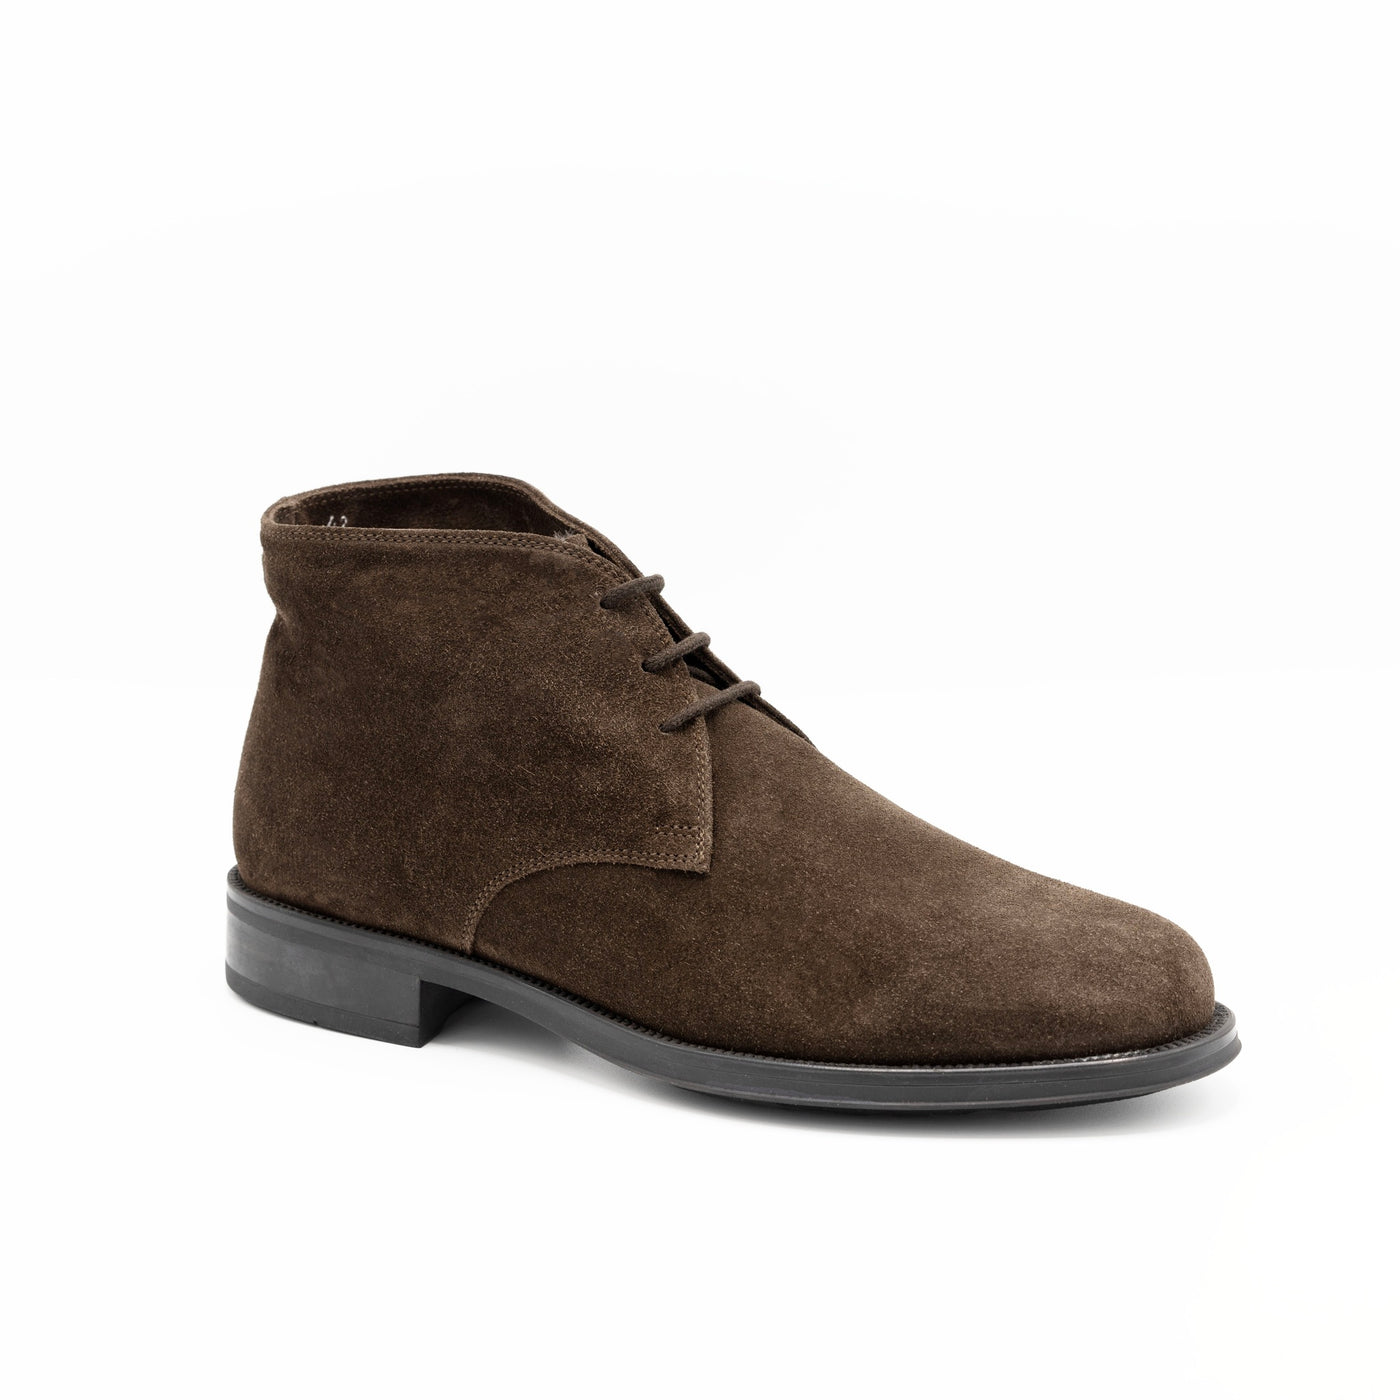 Brown Shearling-Lined Boots